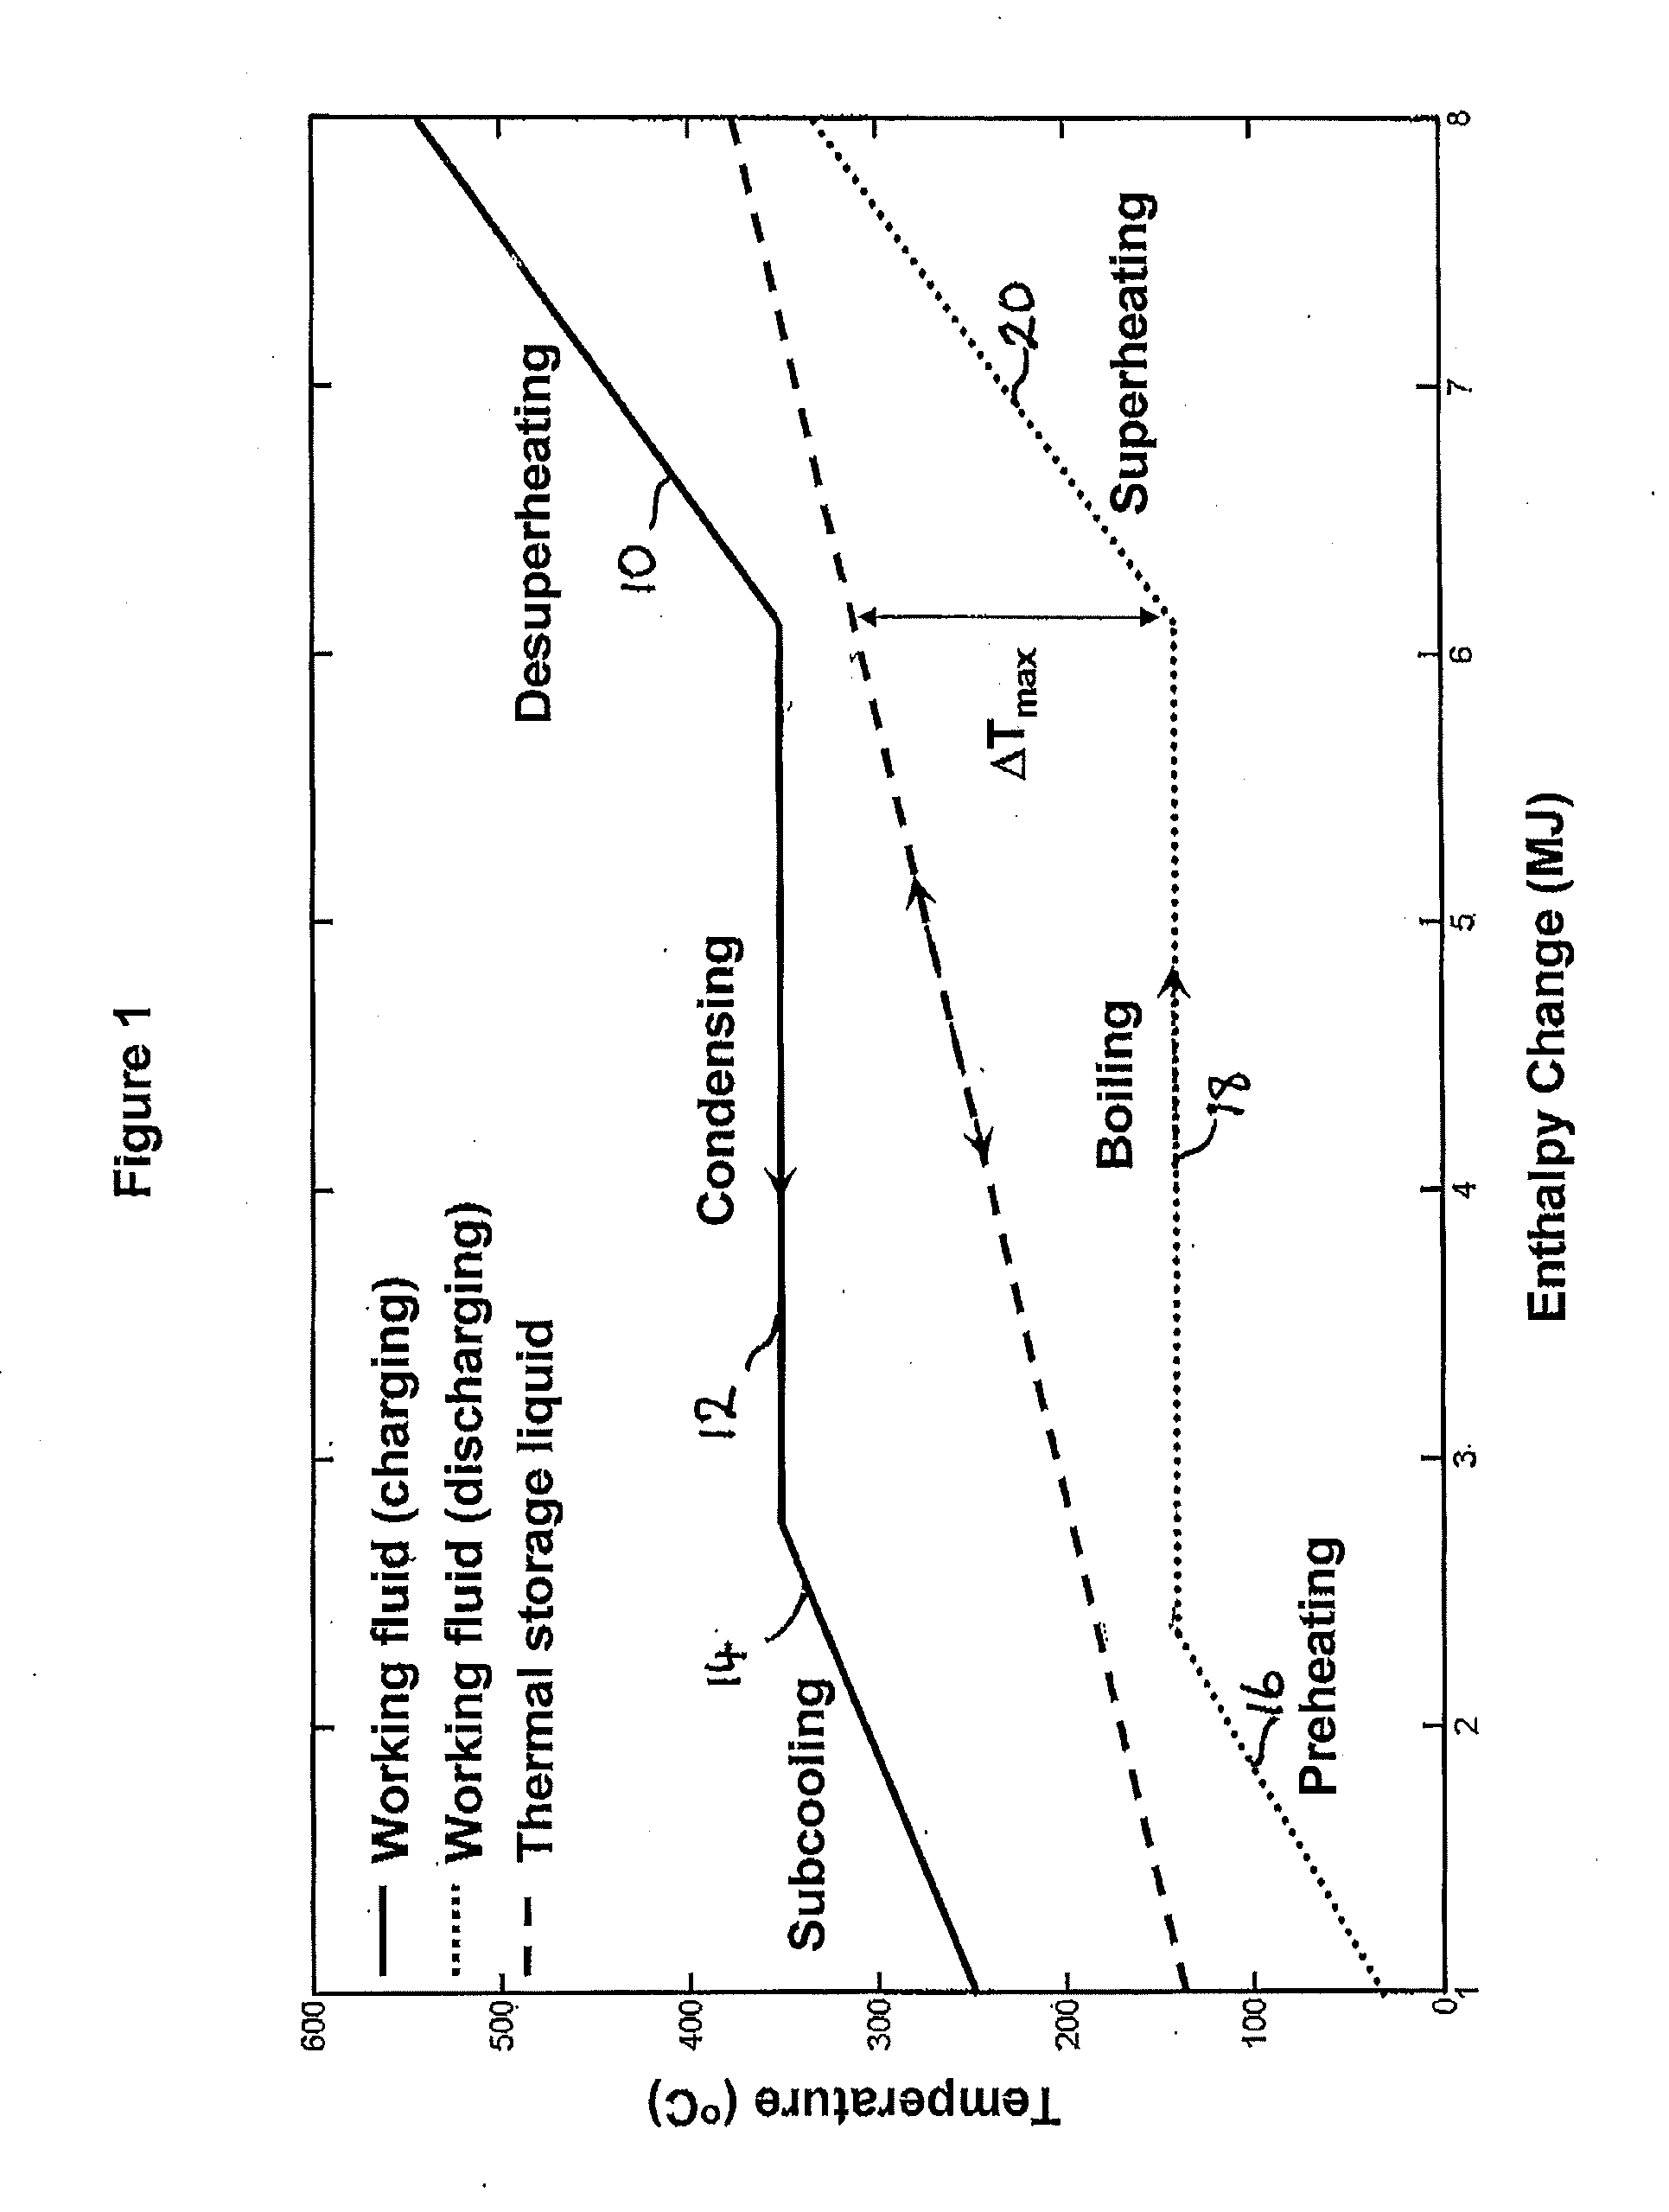 Thermoelectric energy storage system and method for storing thermoelectric energy